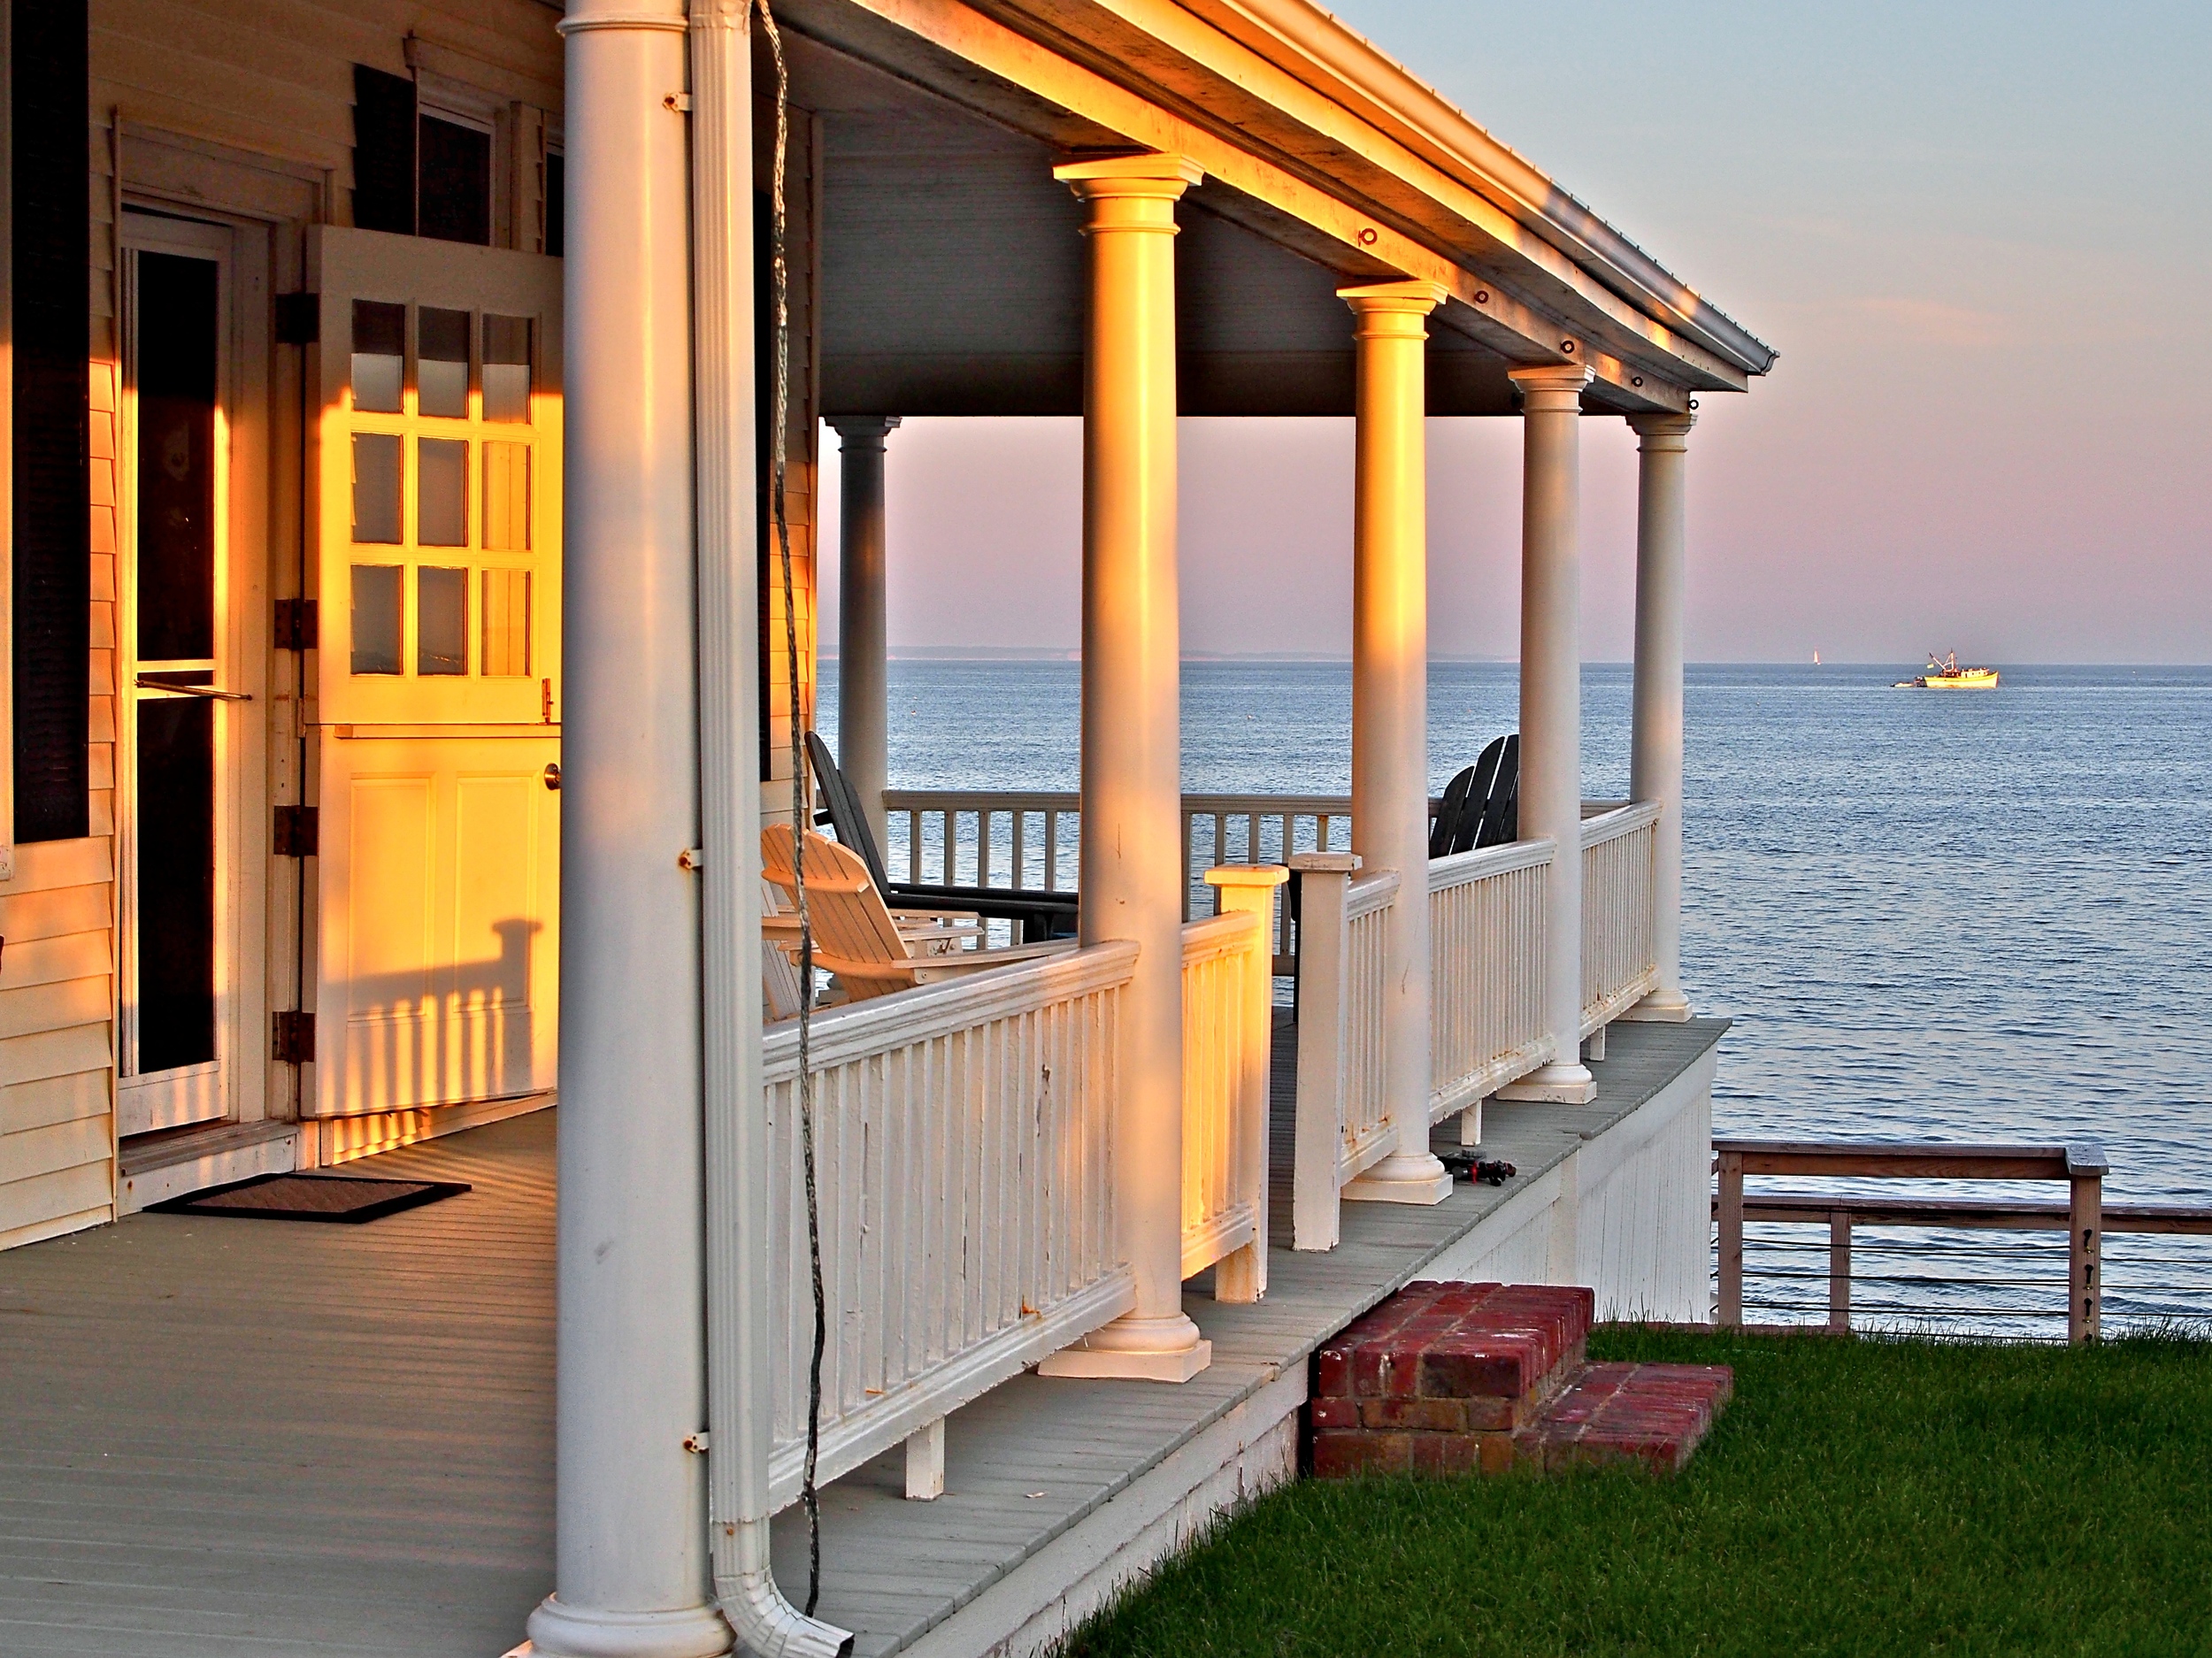 Porch at Sunset, East End